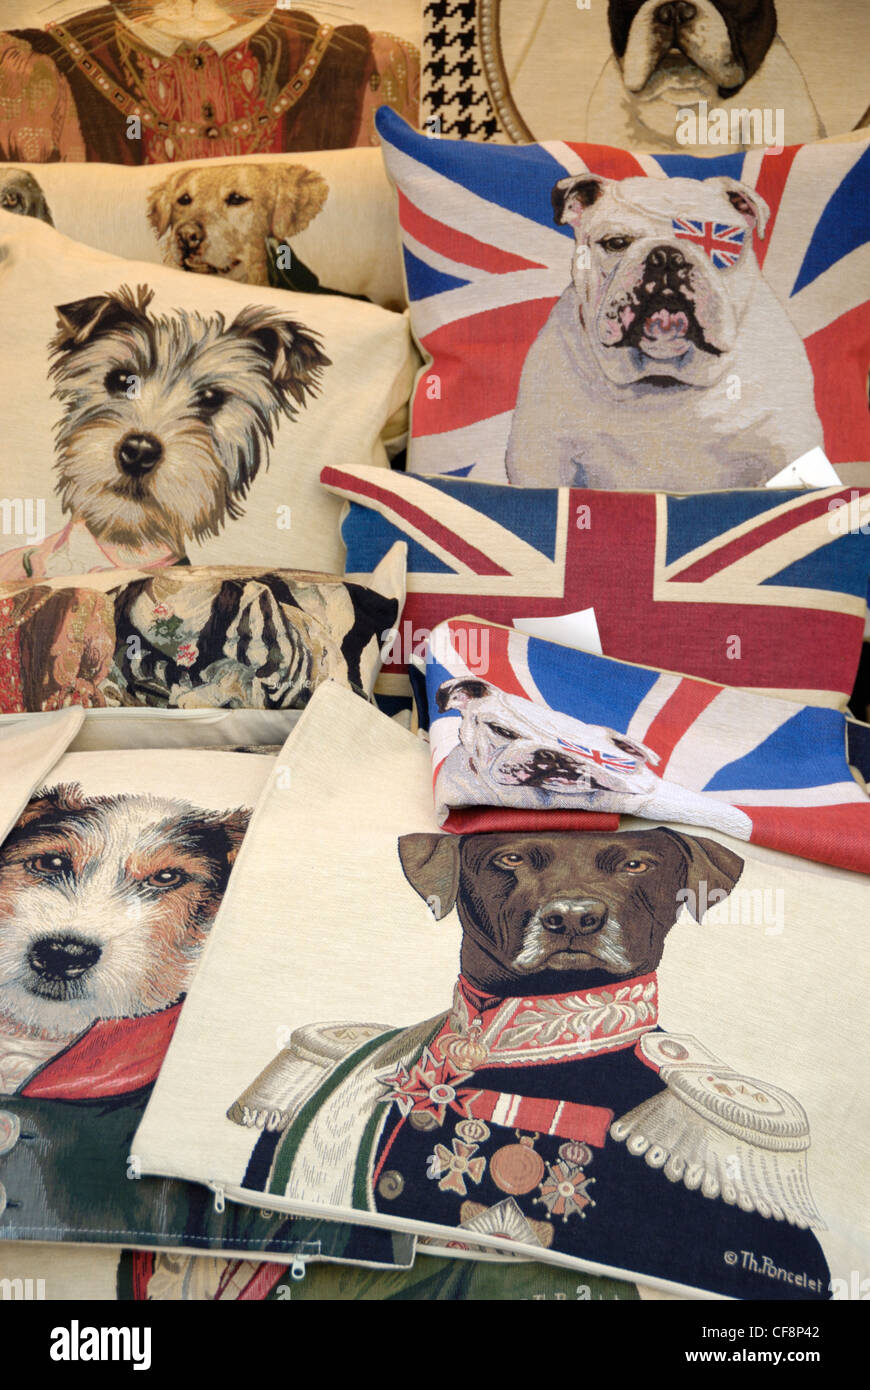 Pictures of various British breeds of dogs on cushions Stock Photo